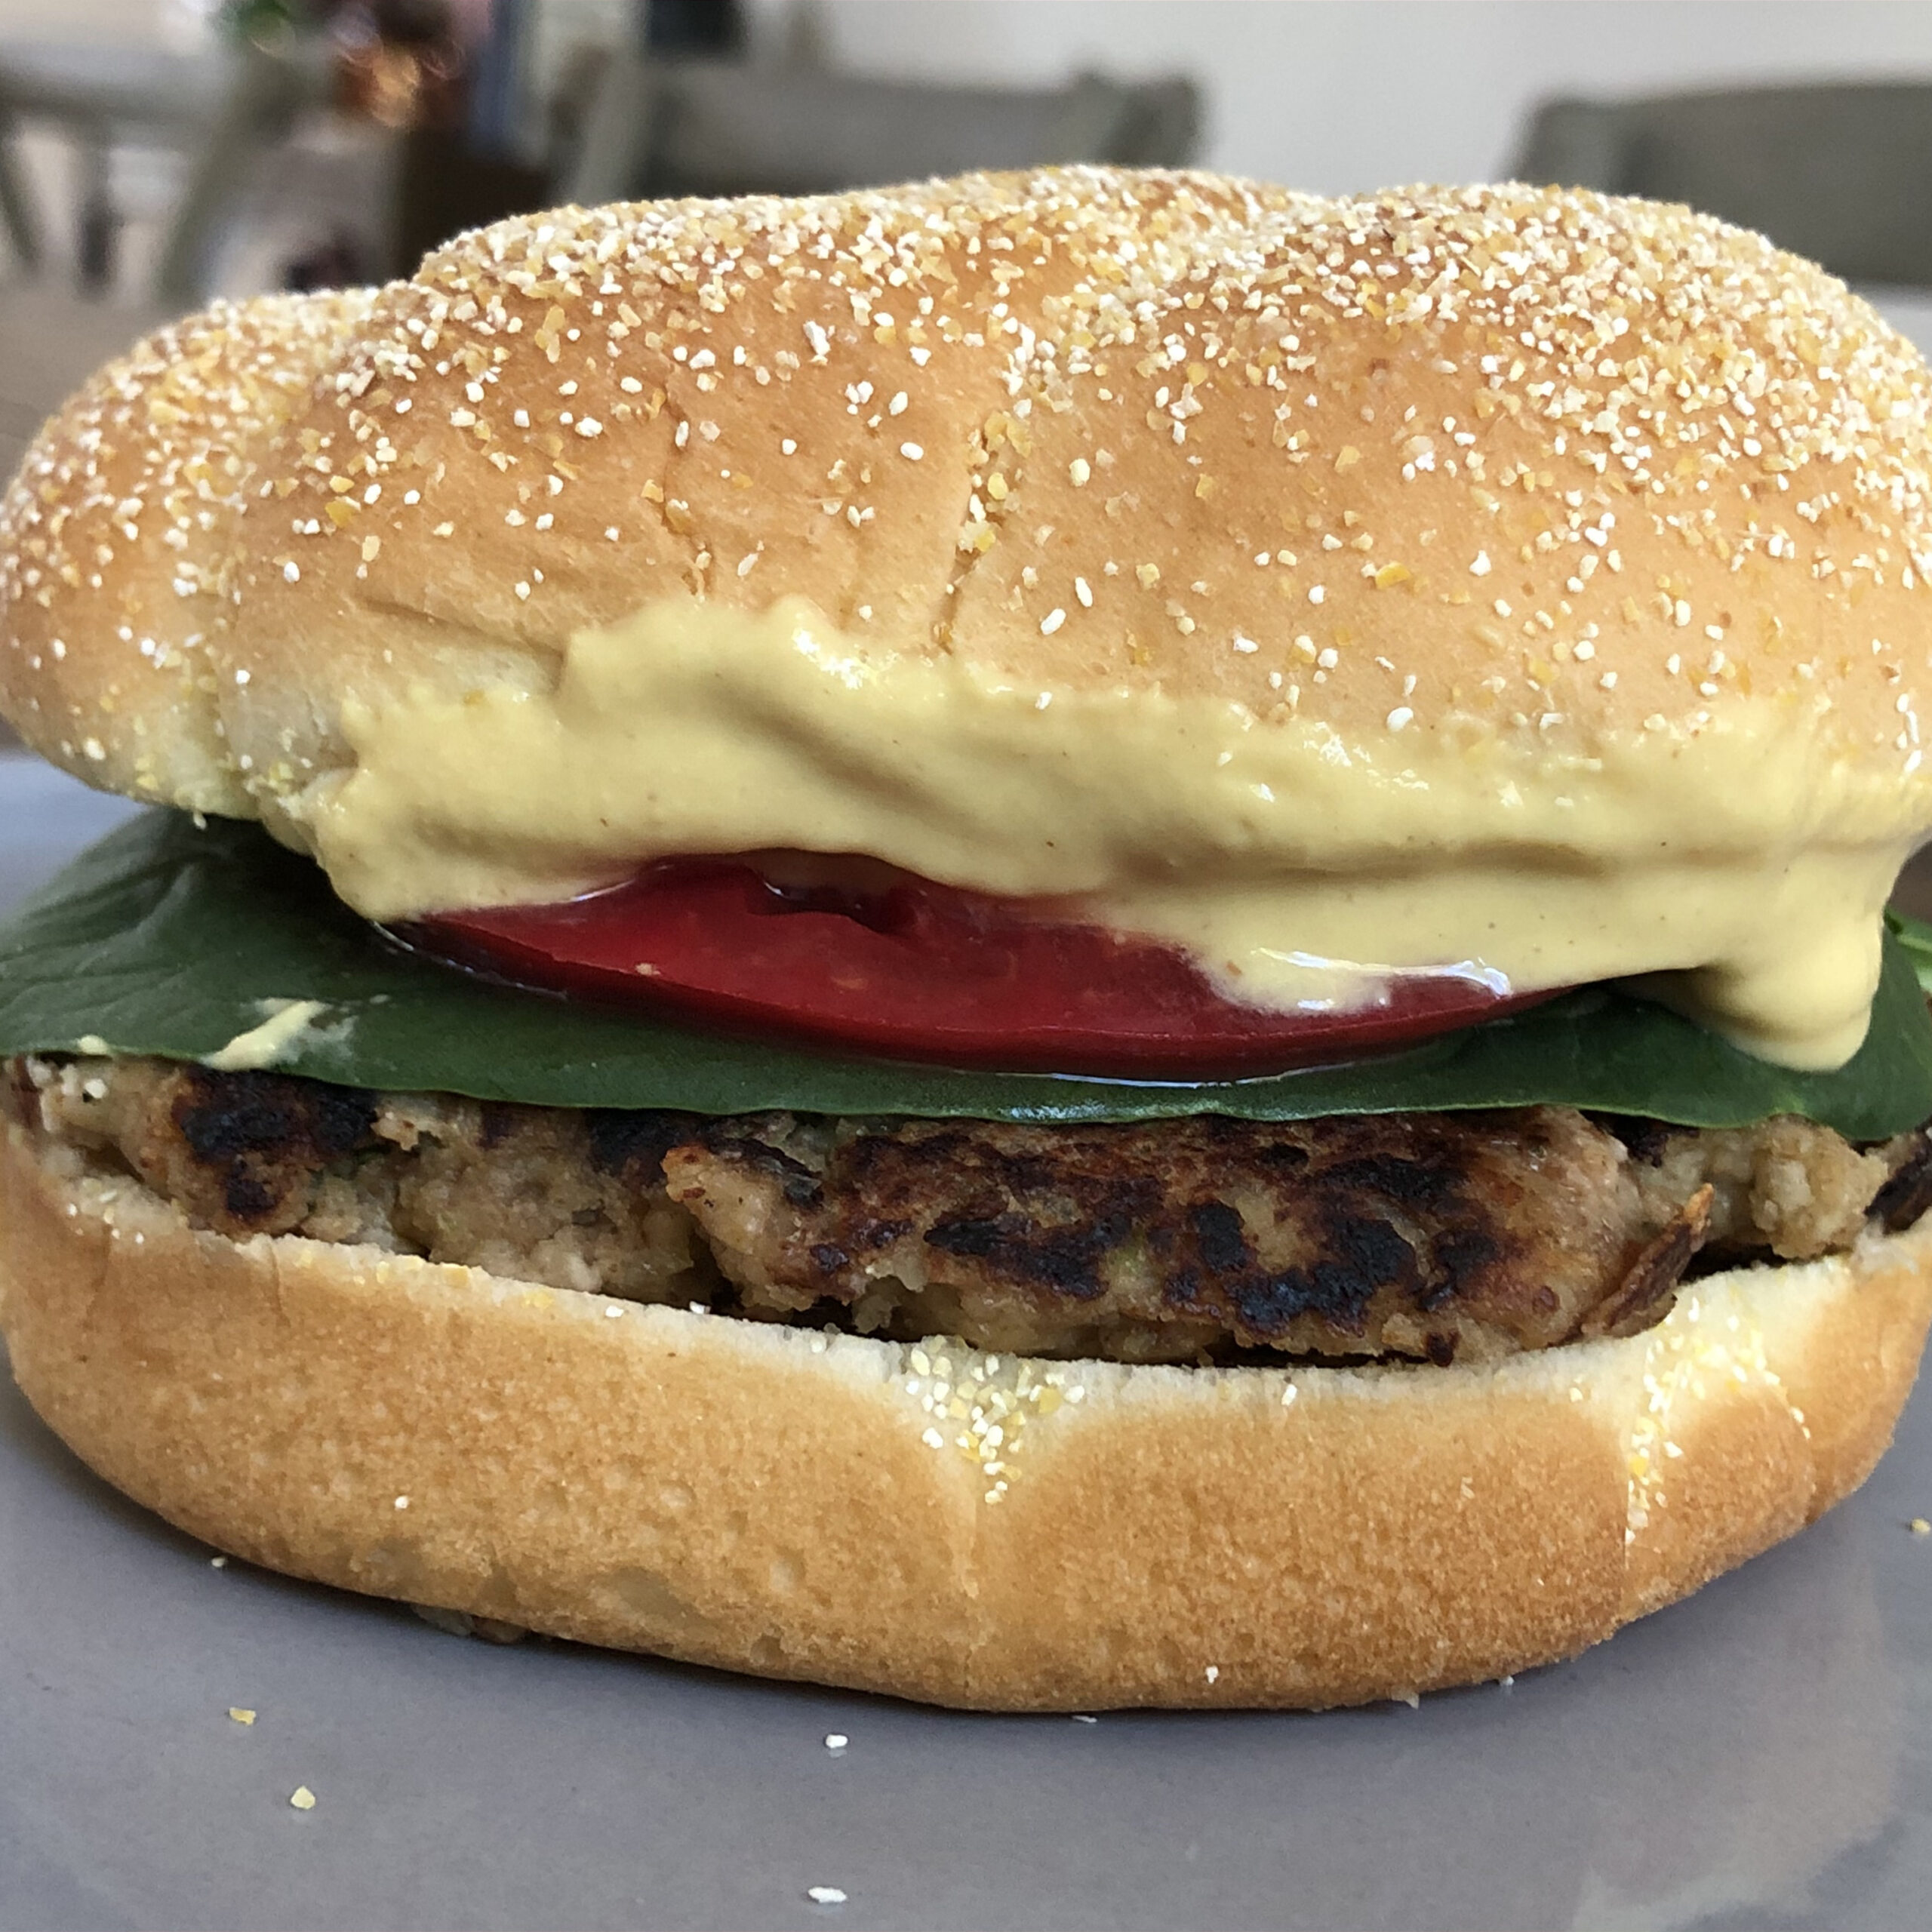 Closeup of a homemade veggie burger on a bun with cheese, tomato and spinach.